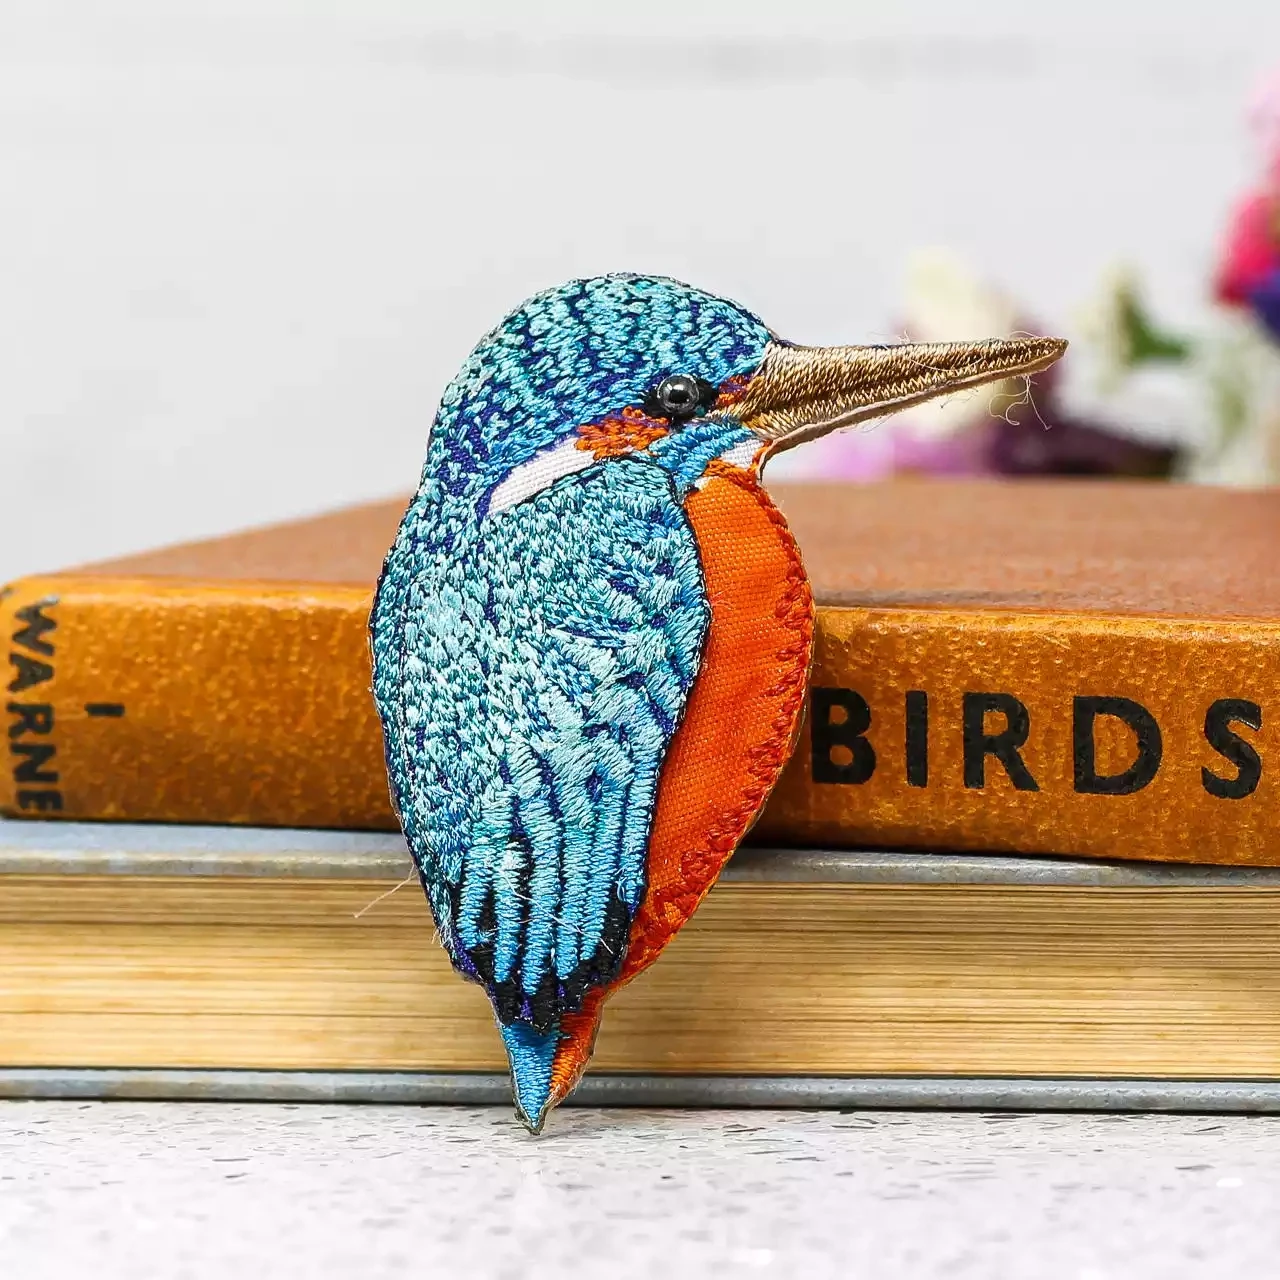 Embroidered Fabric Brooch - Kingfisher by Vikki Lafford Garside